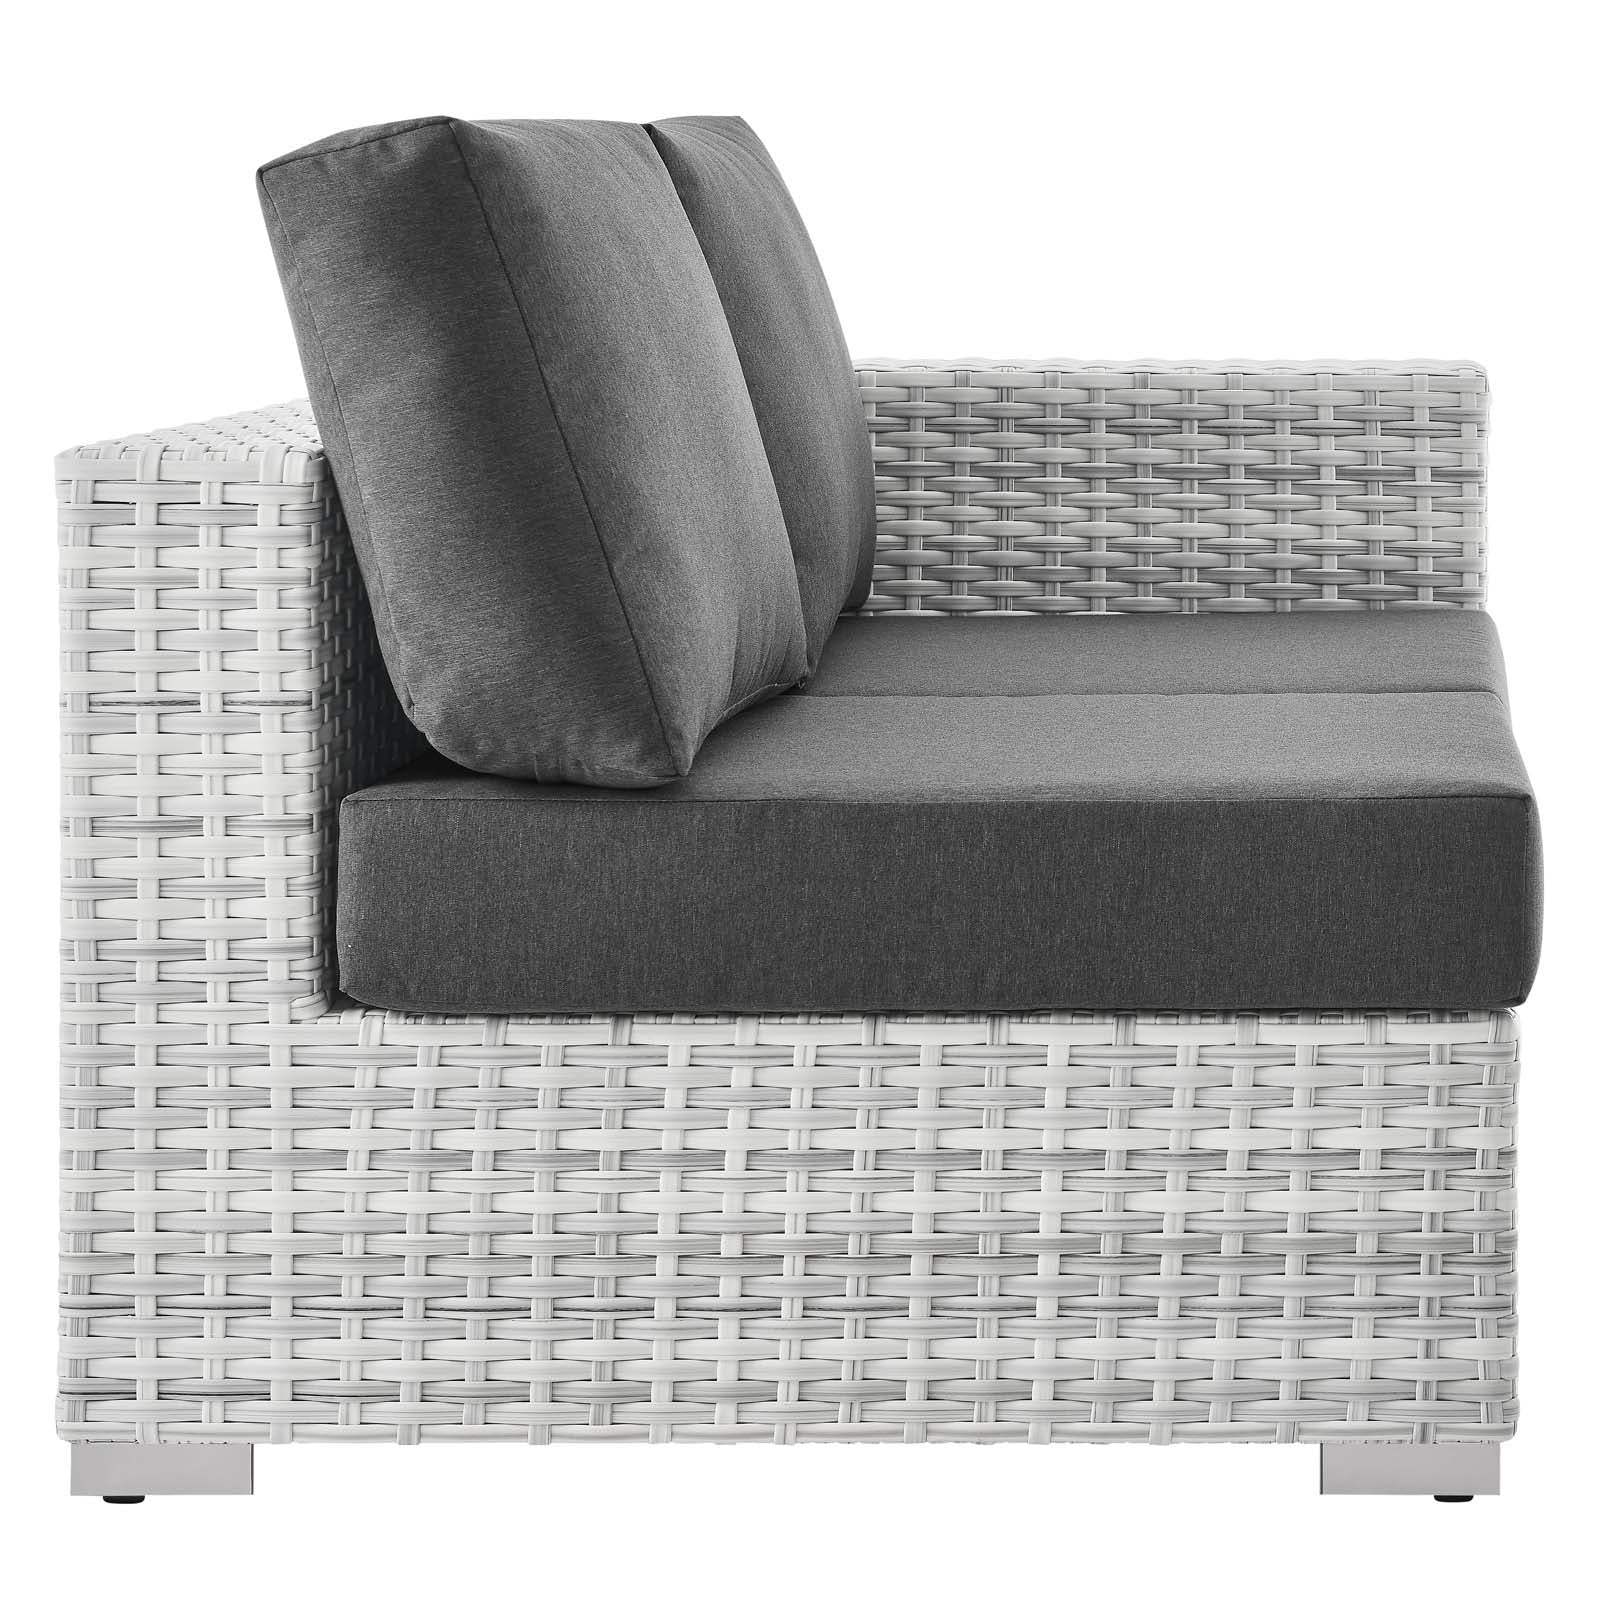 Modway Outdoor Sofas - Convene Outdoor Patio Right-Arm Loveseat Light Gray Charcoal